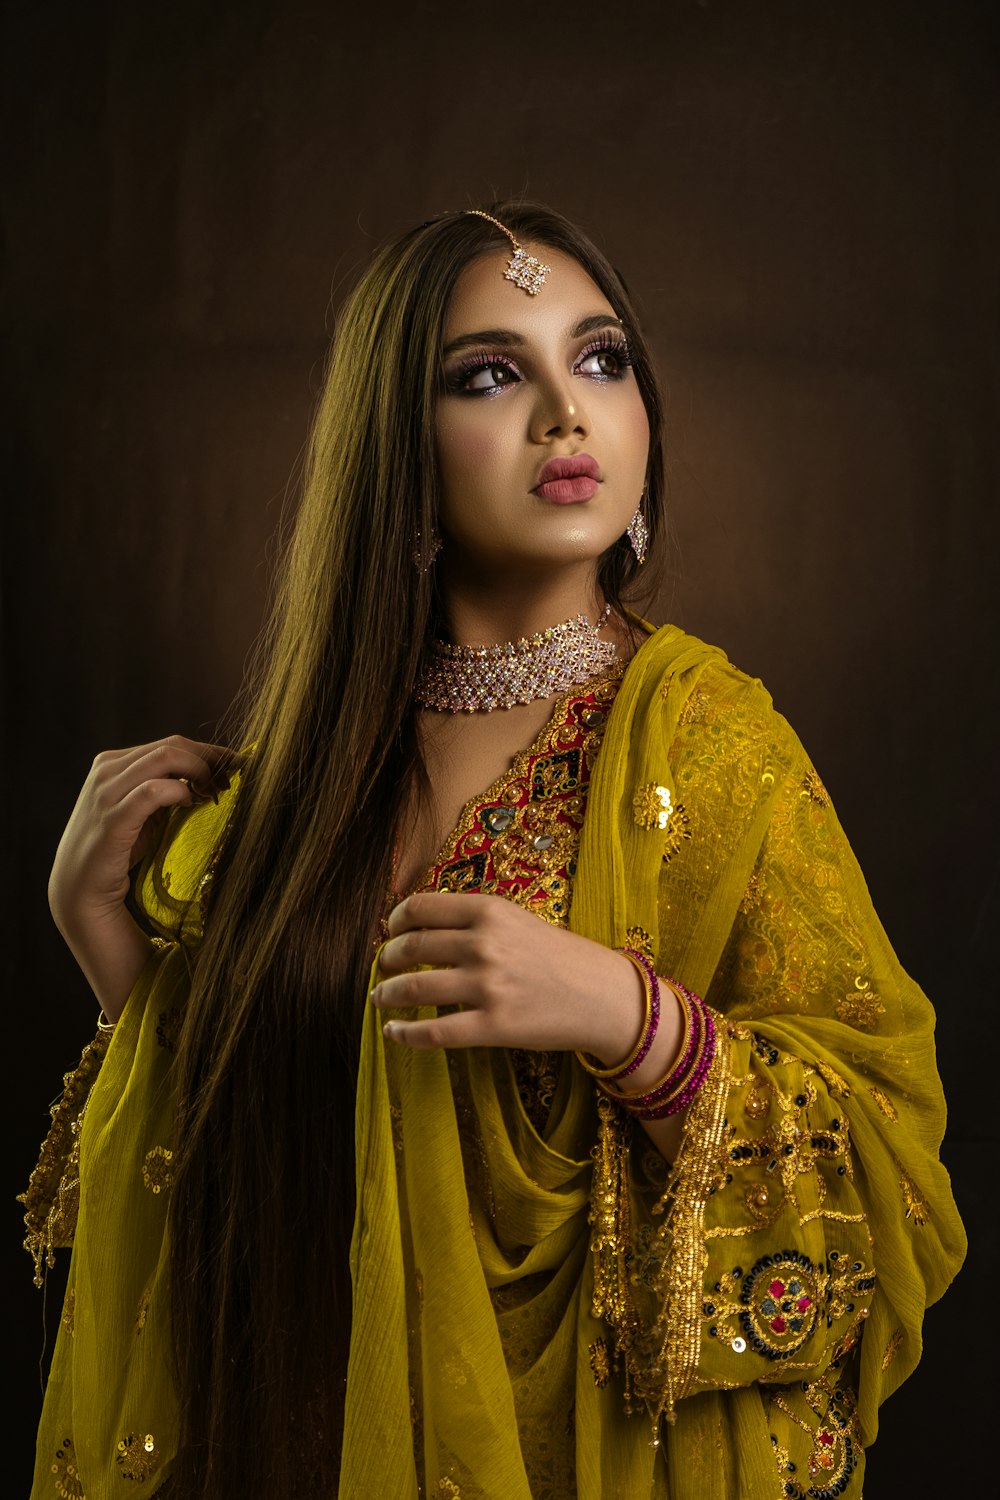 a woman with long hair wearing a yellow outfit